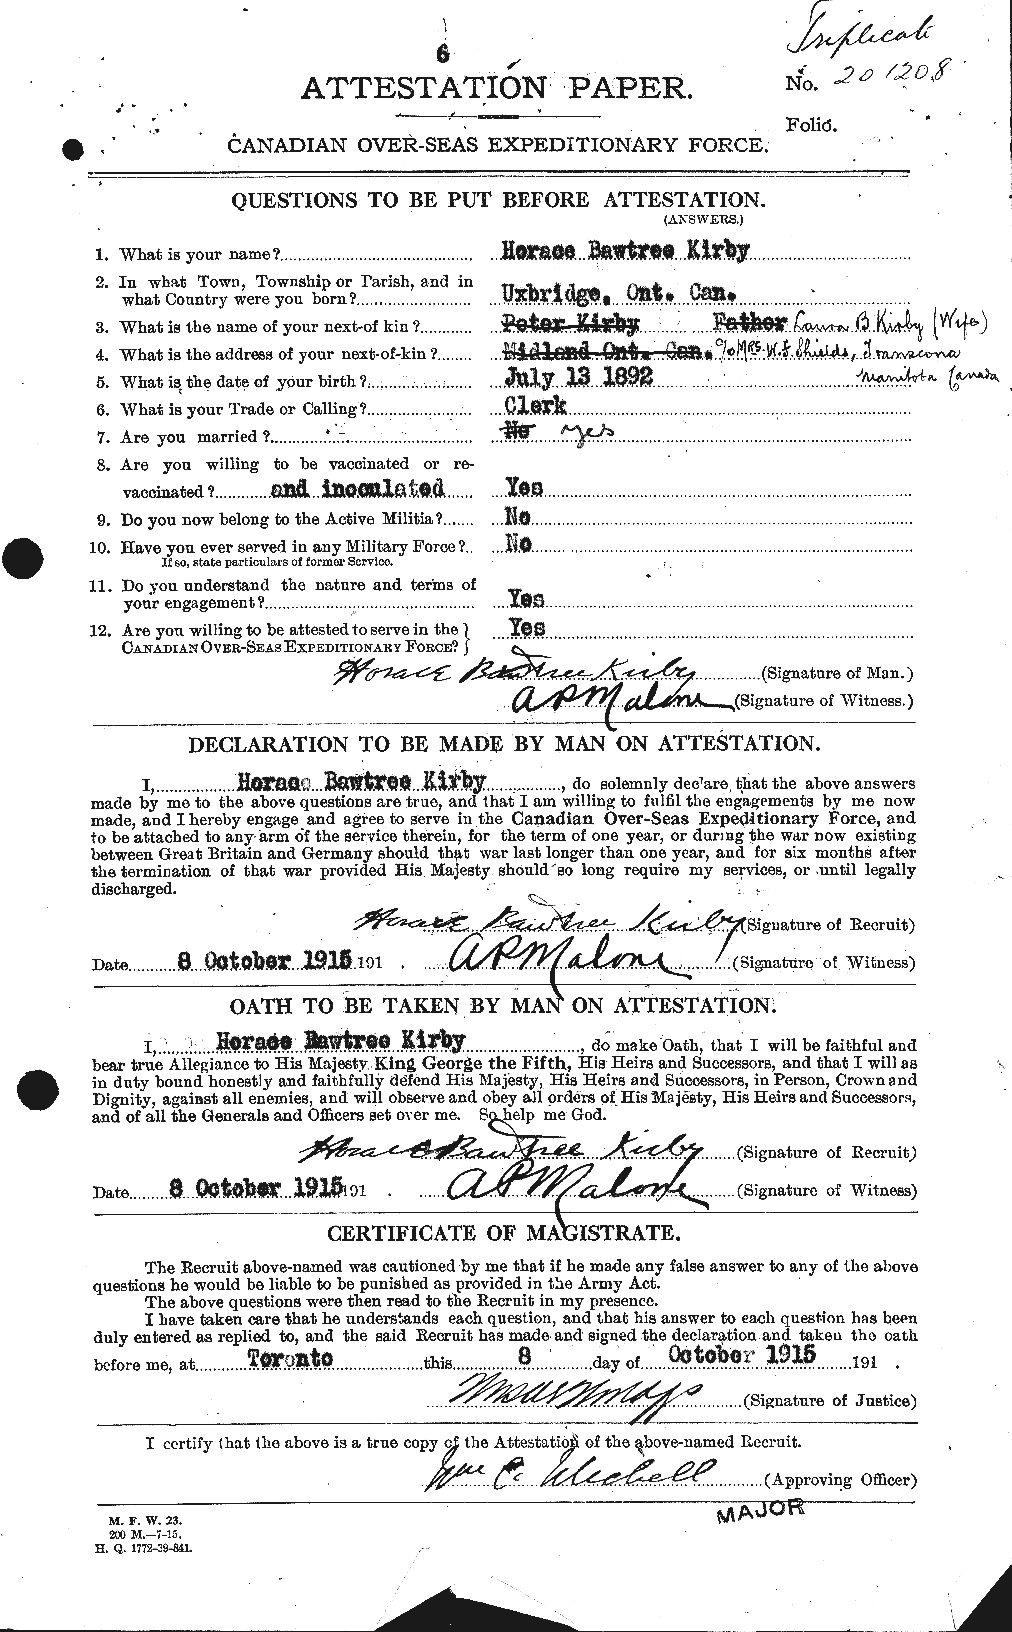 Personnel Records of the First World War - CEF 437215a